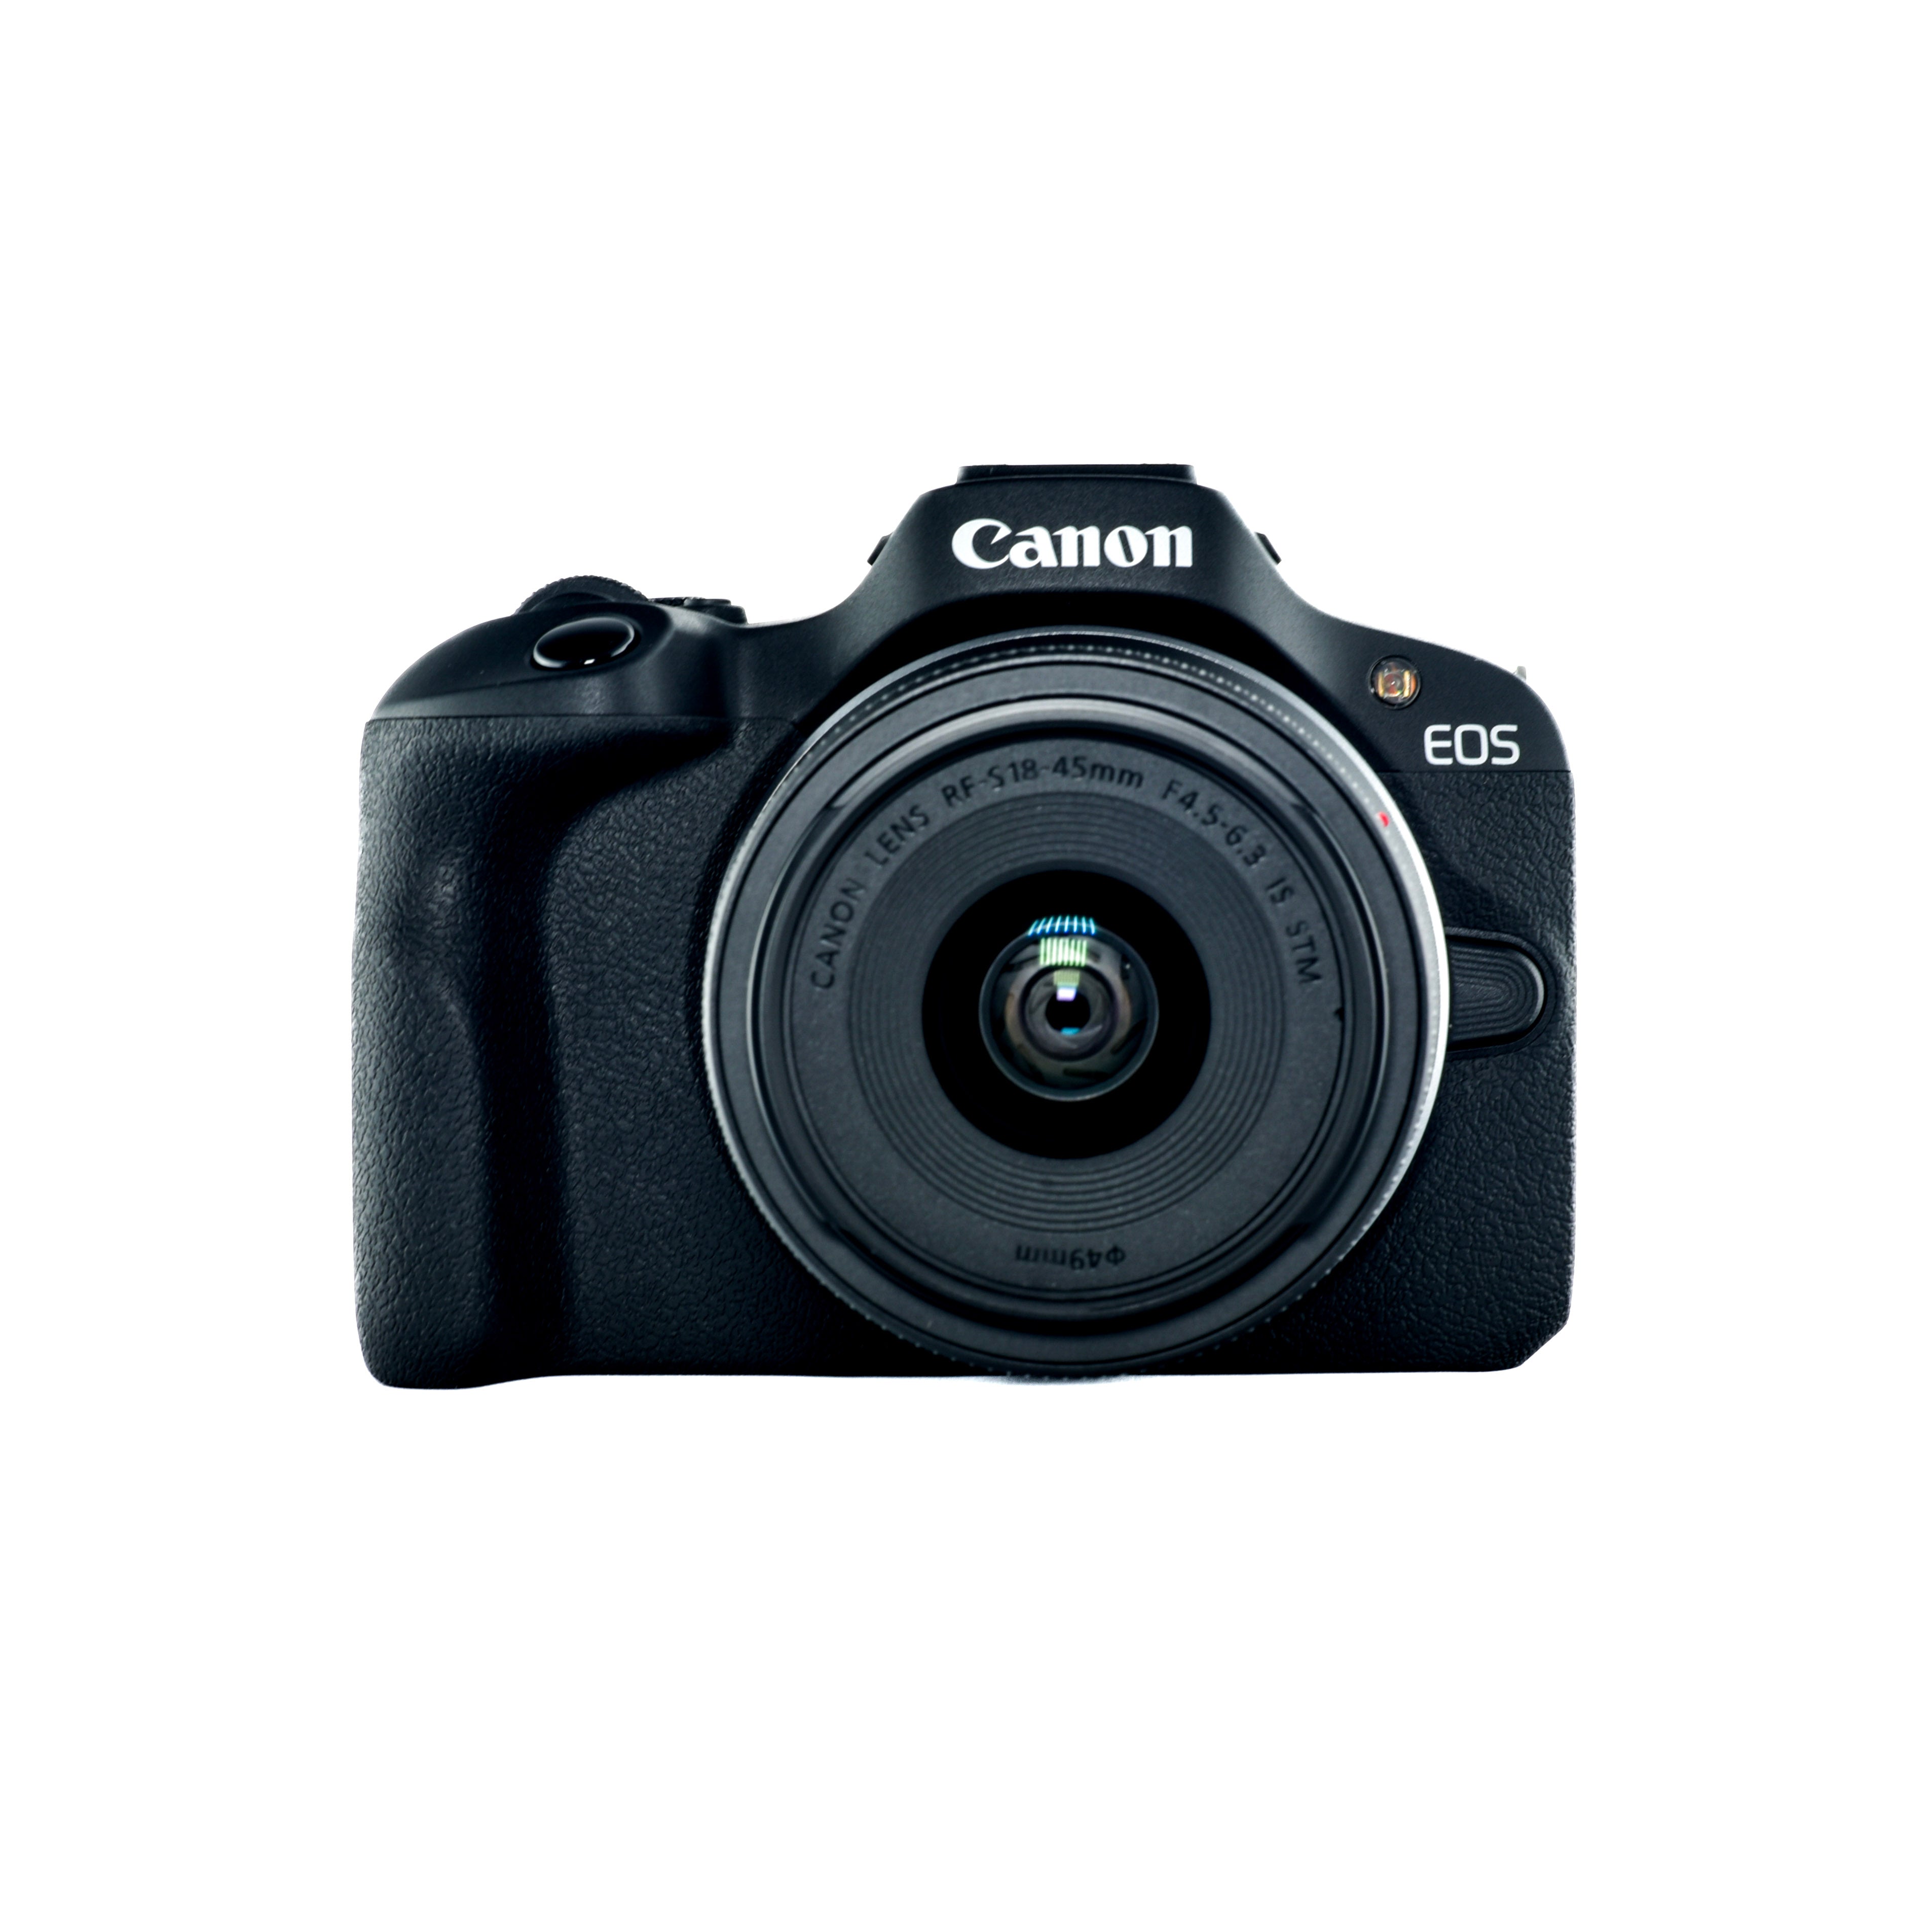 Canon EOS R100 Mirrorless Camera with 18-45mm Lens Bundled with 64GB M